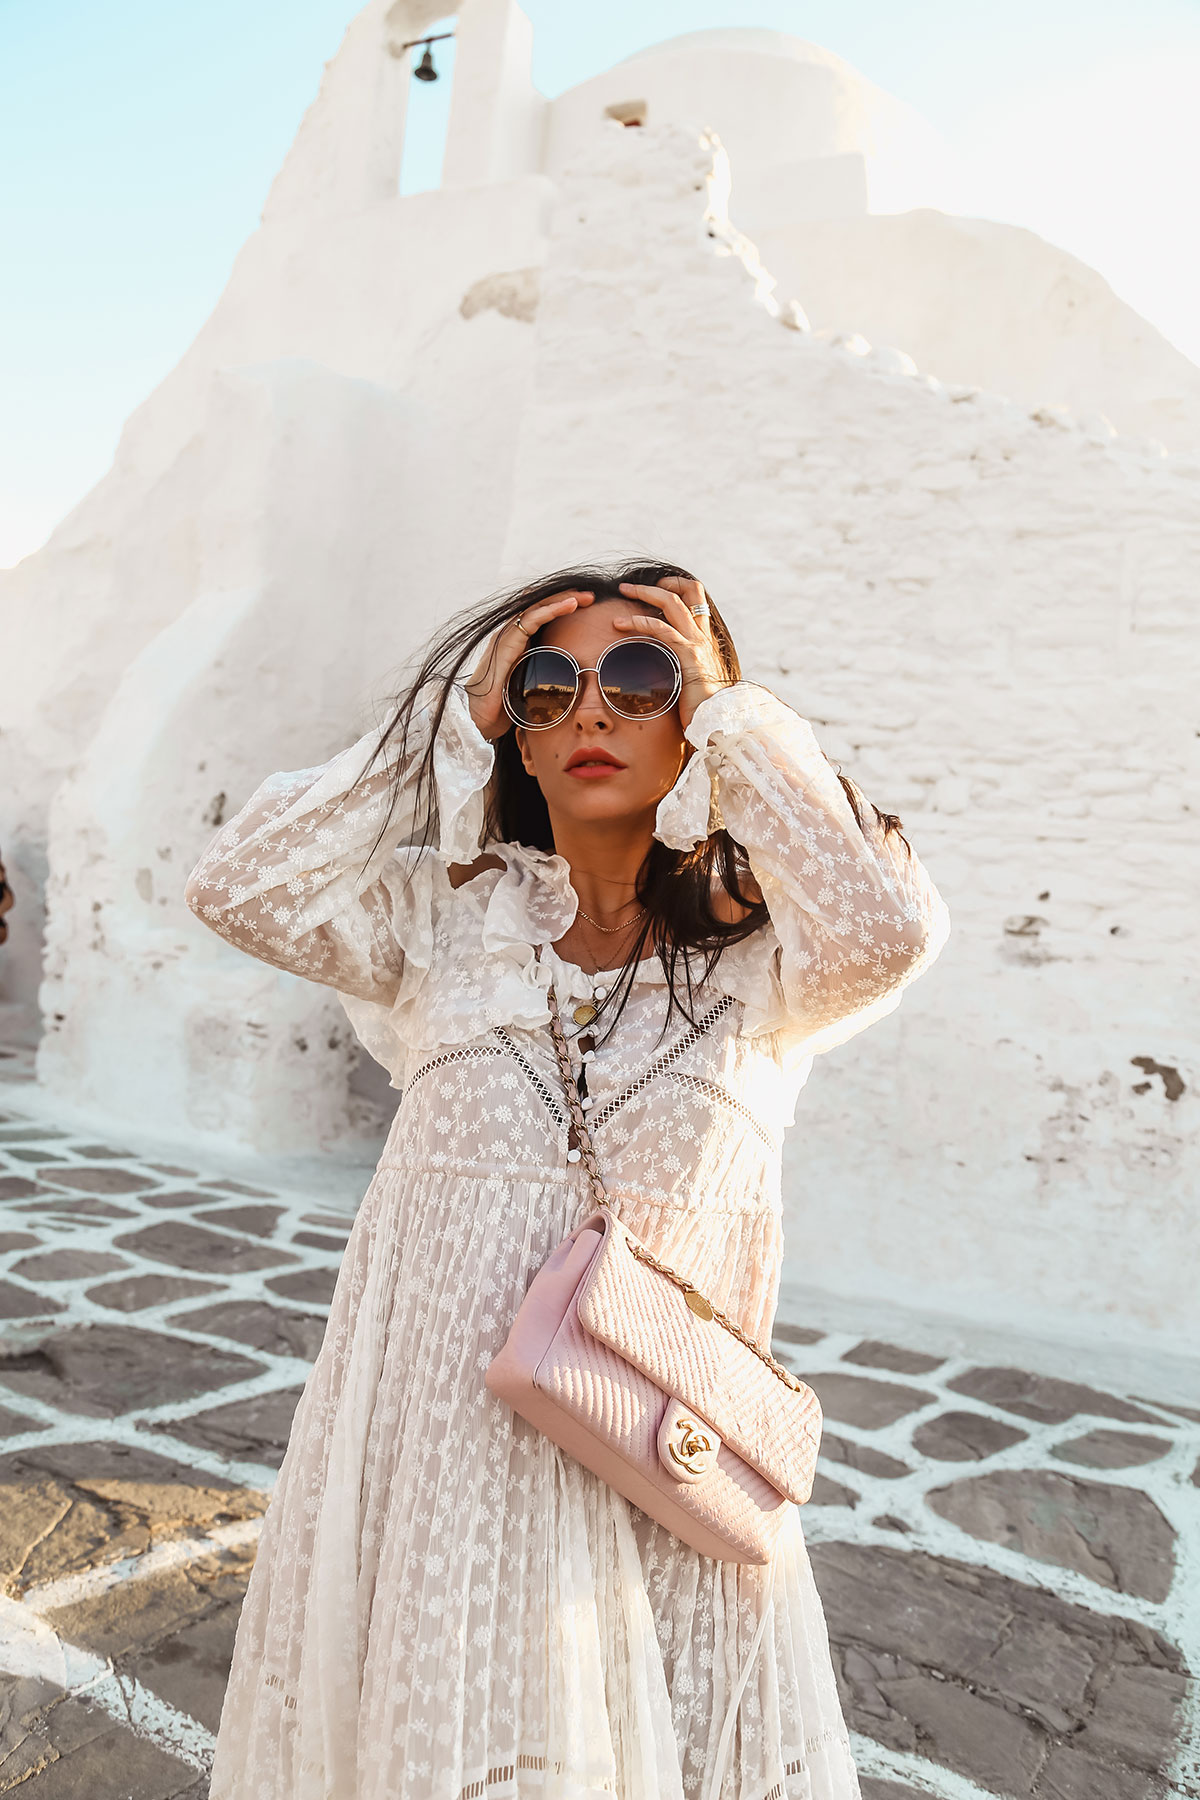 Self-Portrait Dress in Mykonos worn by Stella Asteria - Fashion & Lifestyle Blogger - worn with pink Chanel bag and Chloe sunglasses